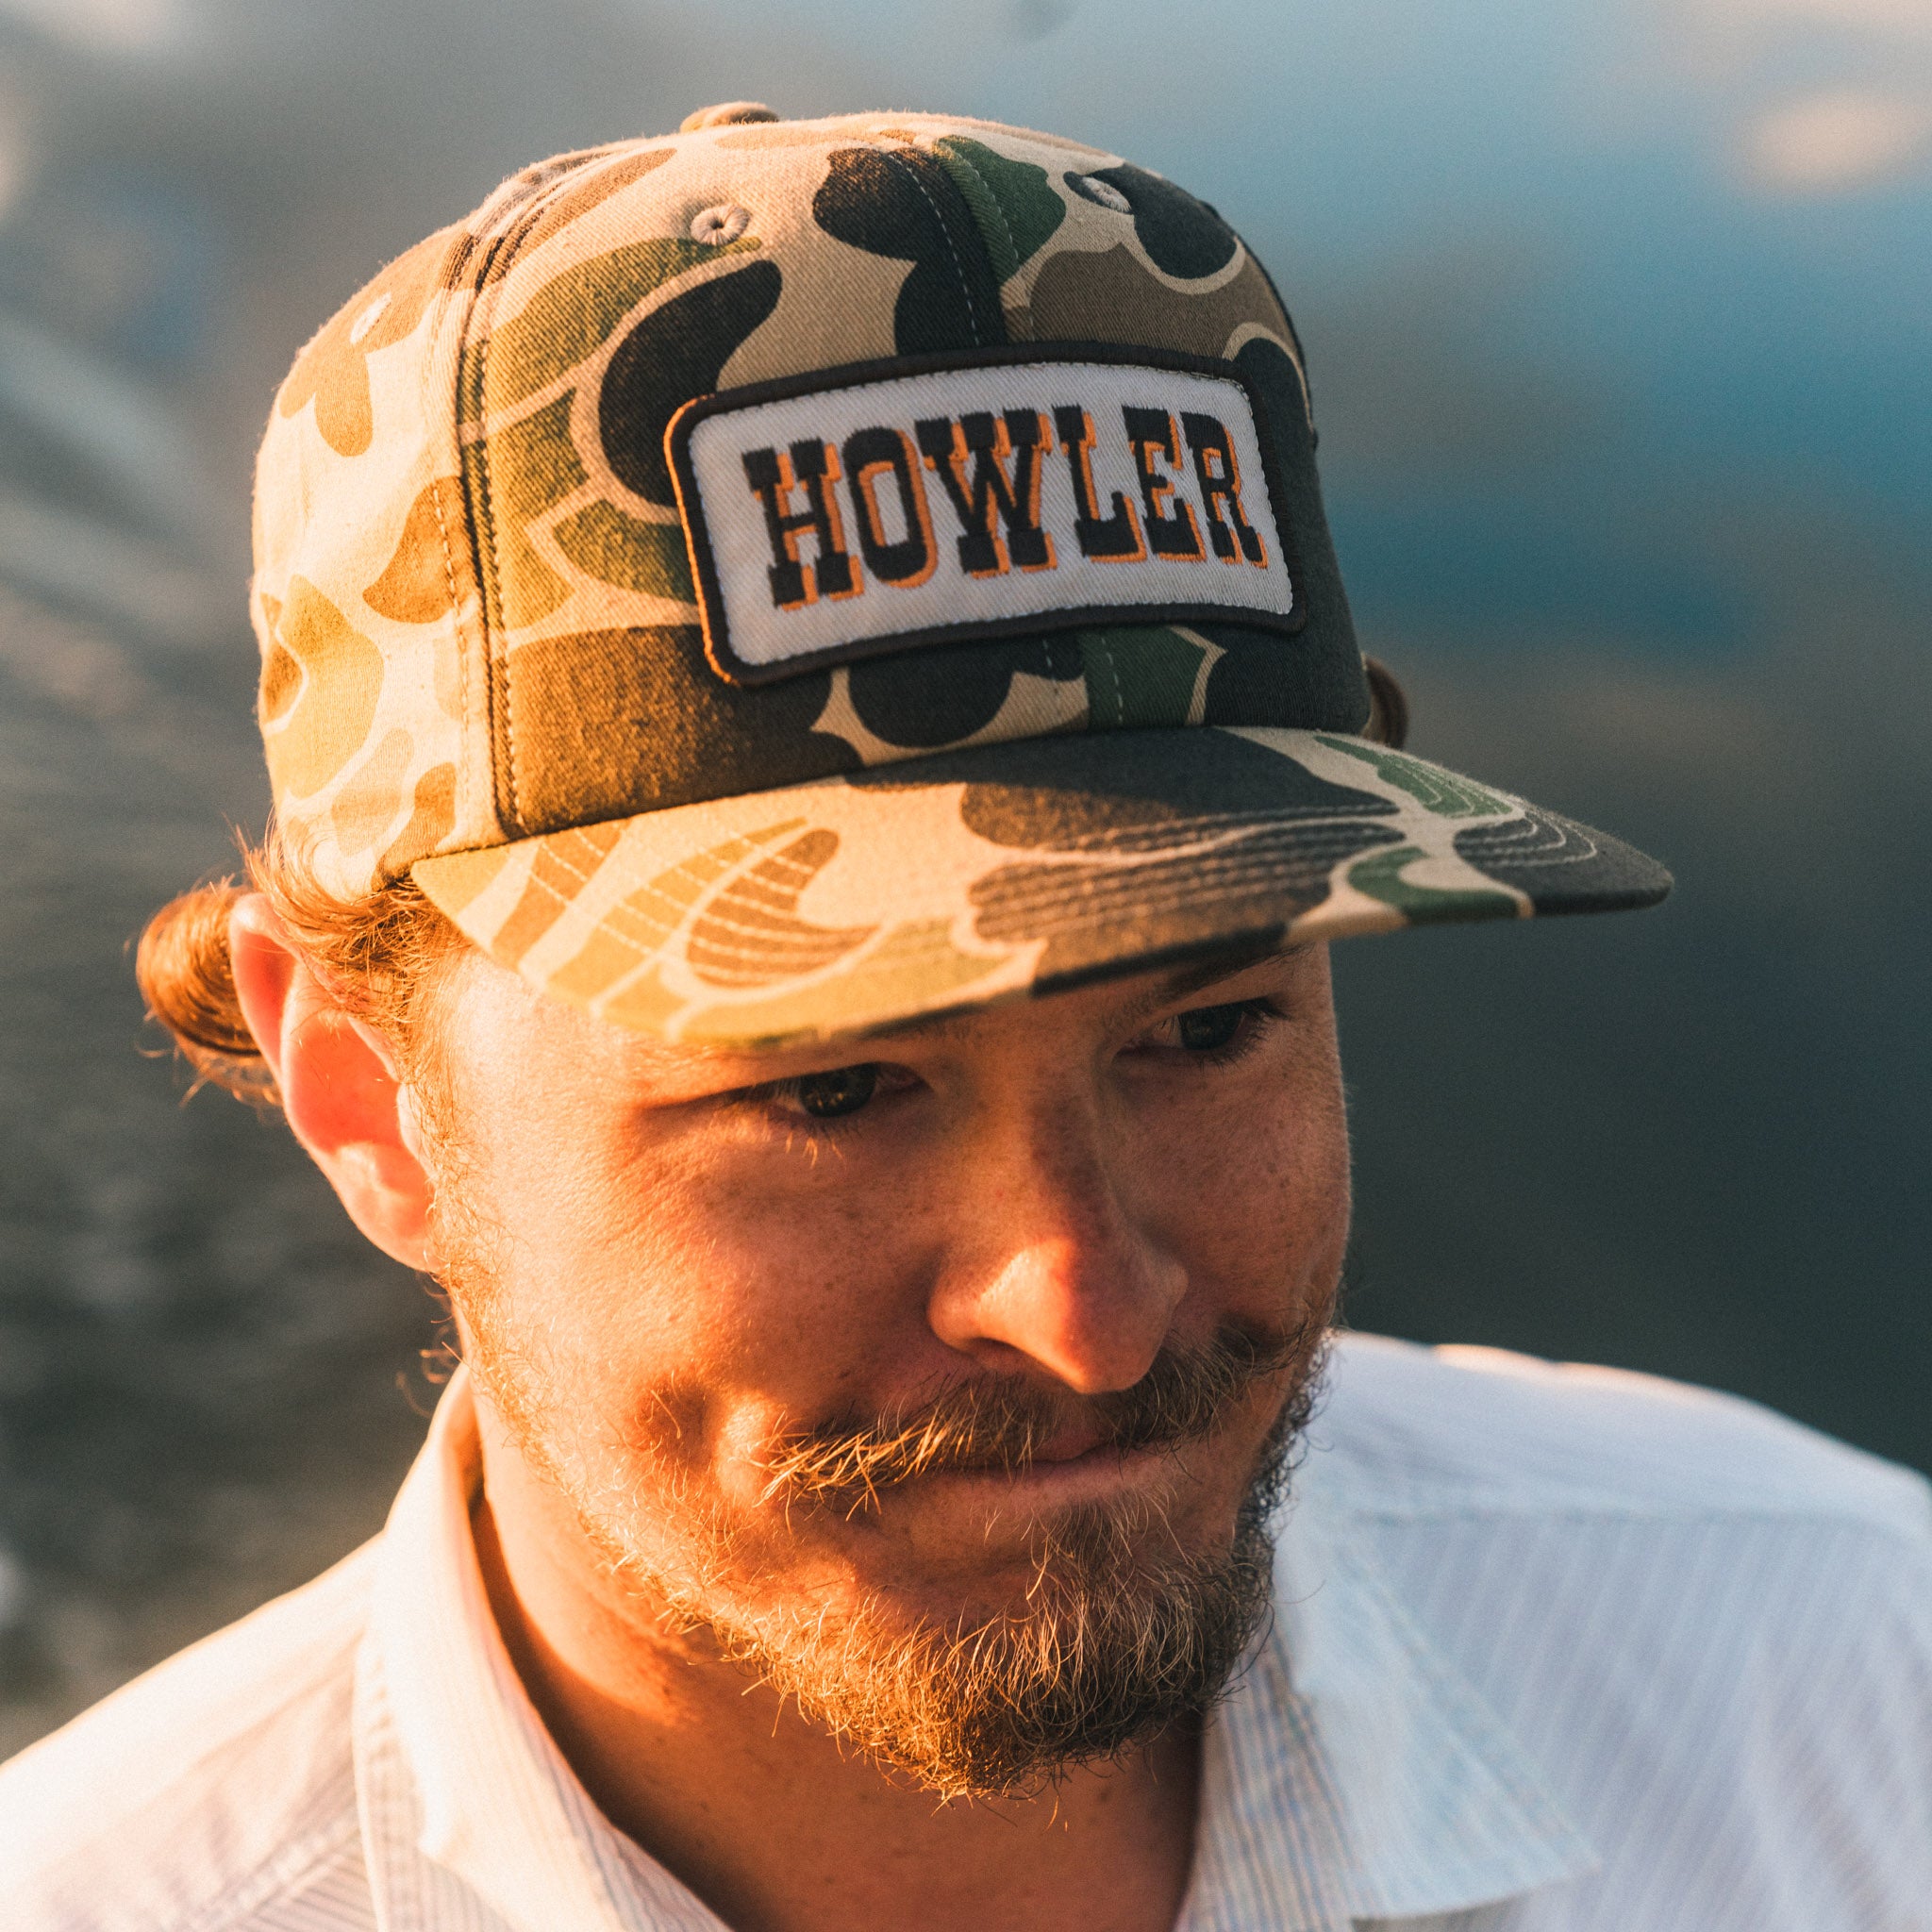 Irie Paradise Snapback : Brown – HOWLER BROTHERS